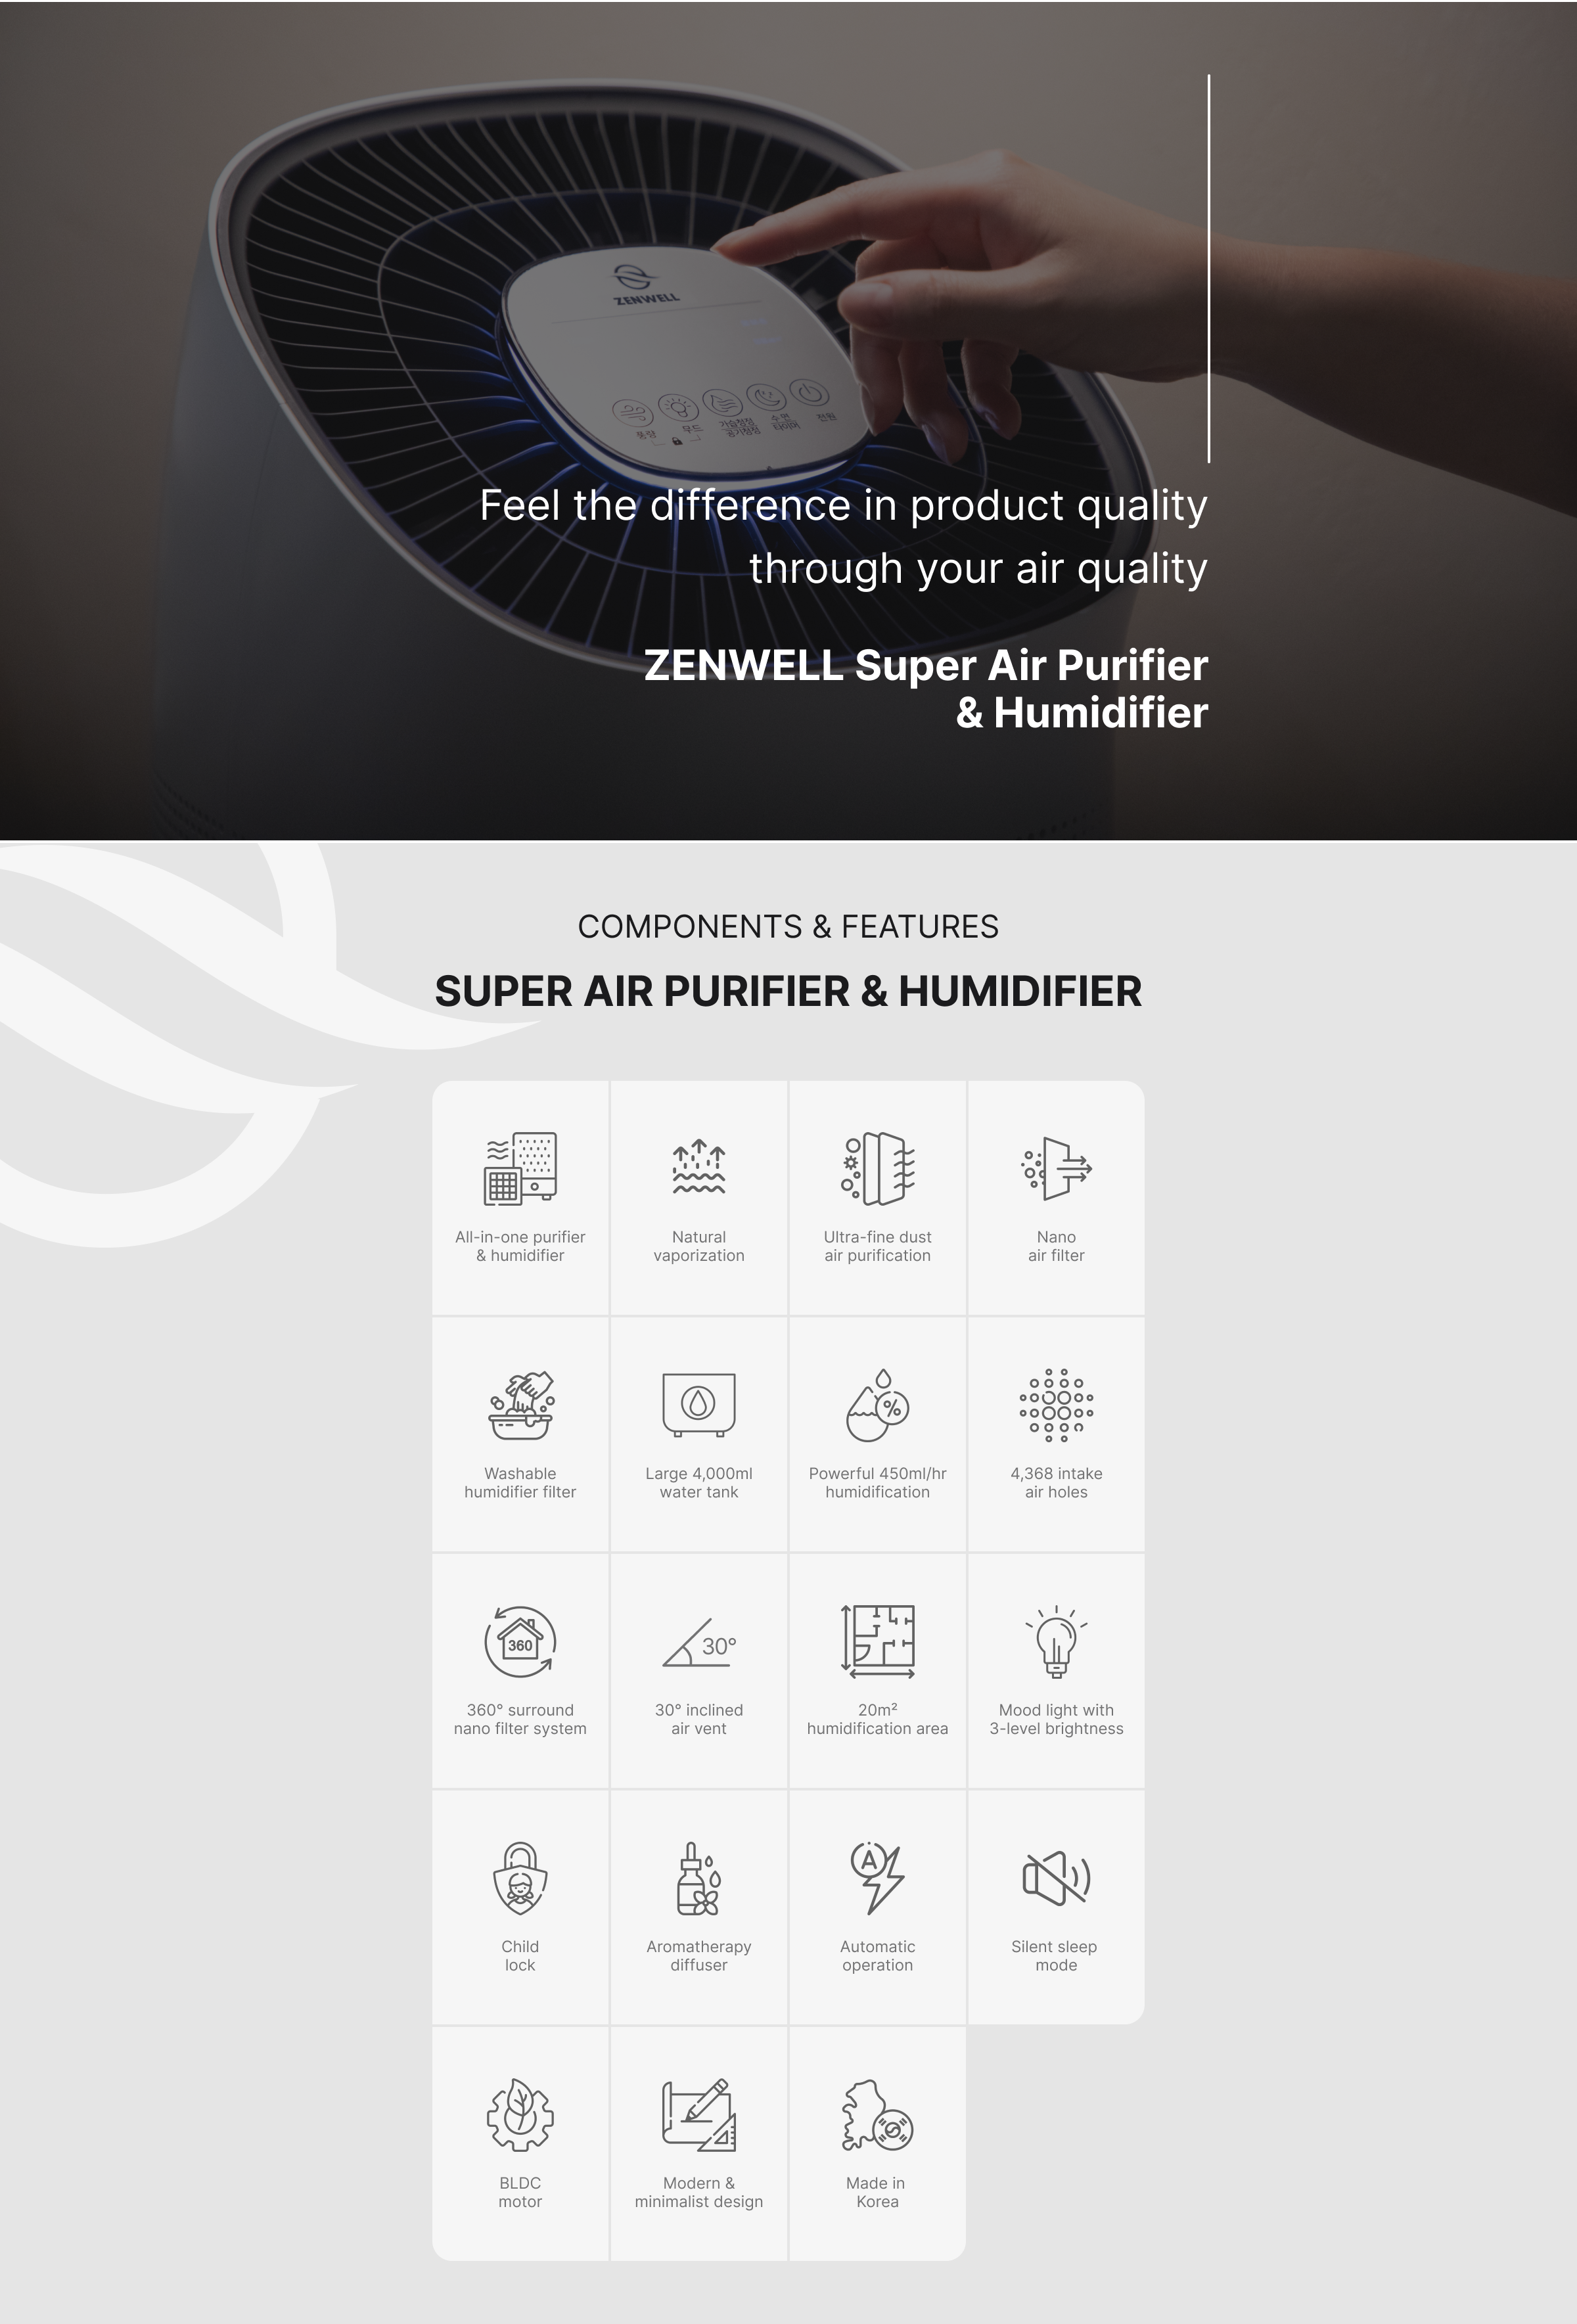 Super Air Purifier and Humidifier Smart feature chart including All-in-one purifier & humidifier, Natural vaporization, Ultra-fine dust air purification, Nano air filter, Washable humidifier filter, 4,000ml water tank, 450ml/hr humidification, 4,368 intake holes, 360° surround nano filter, 30° inclined air vent, 20 square meter humidification area, Mood light, Child lock, Aromatherapy diffuser, Automatic operation, Silent sleep mode, BLDC motor, Modern & minimalist design, and Made in Korea